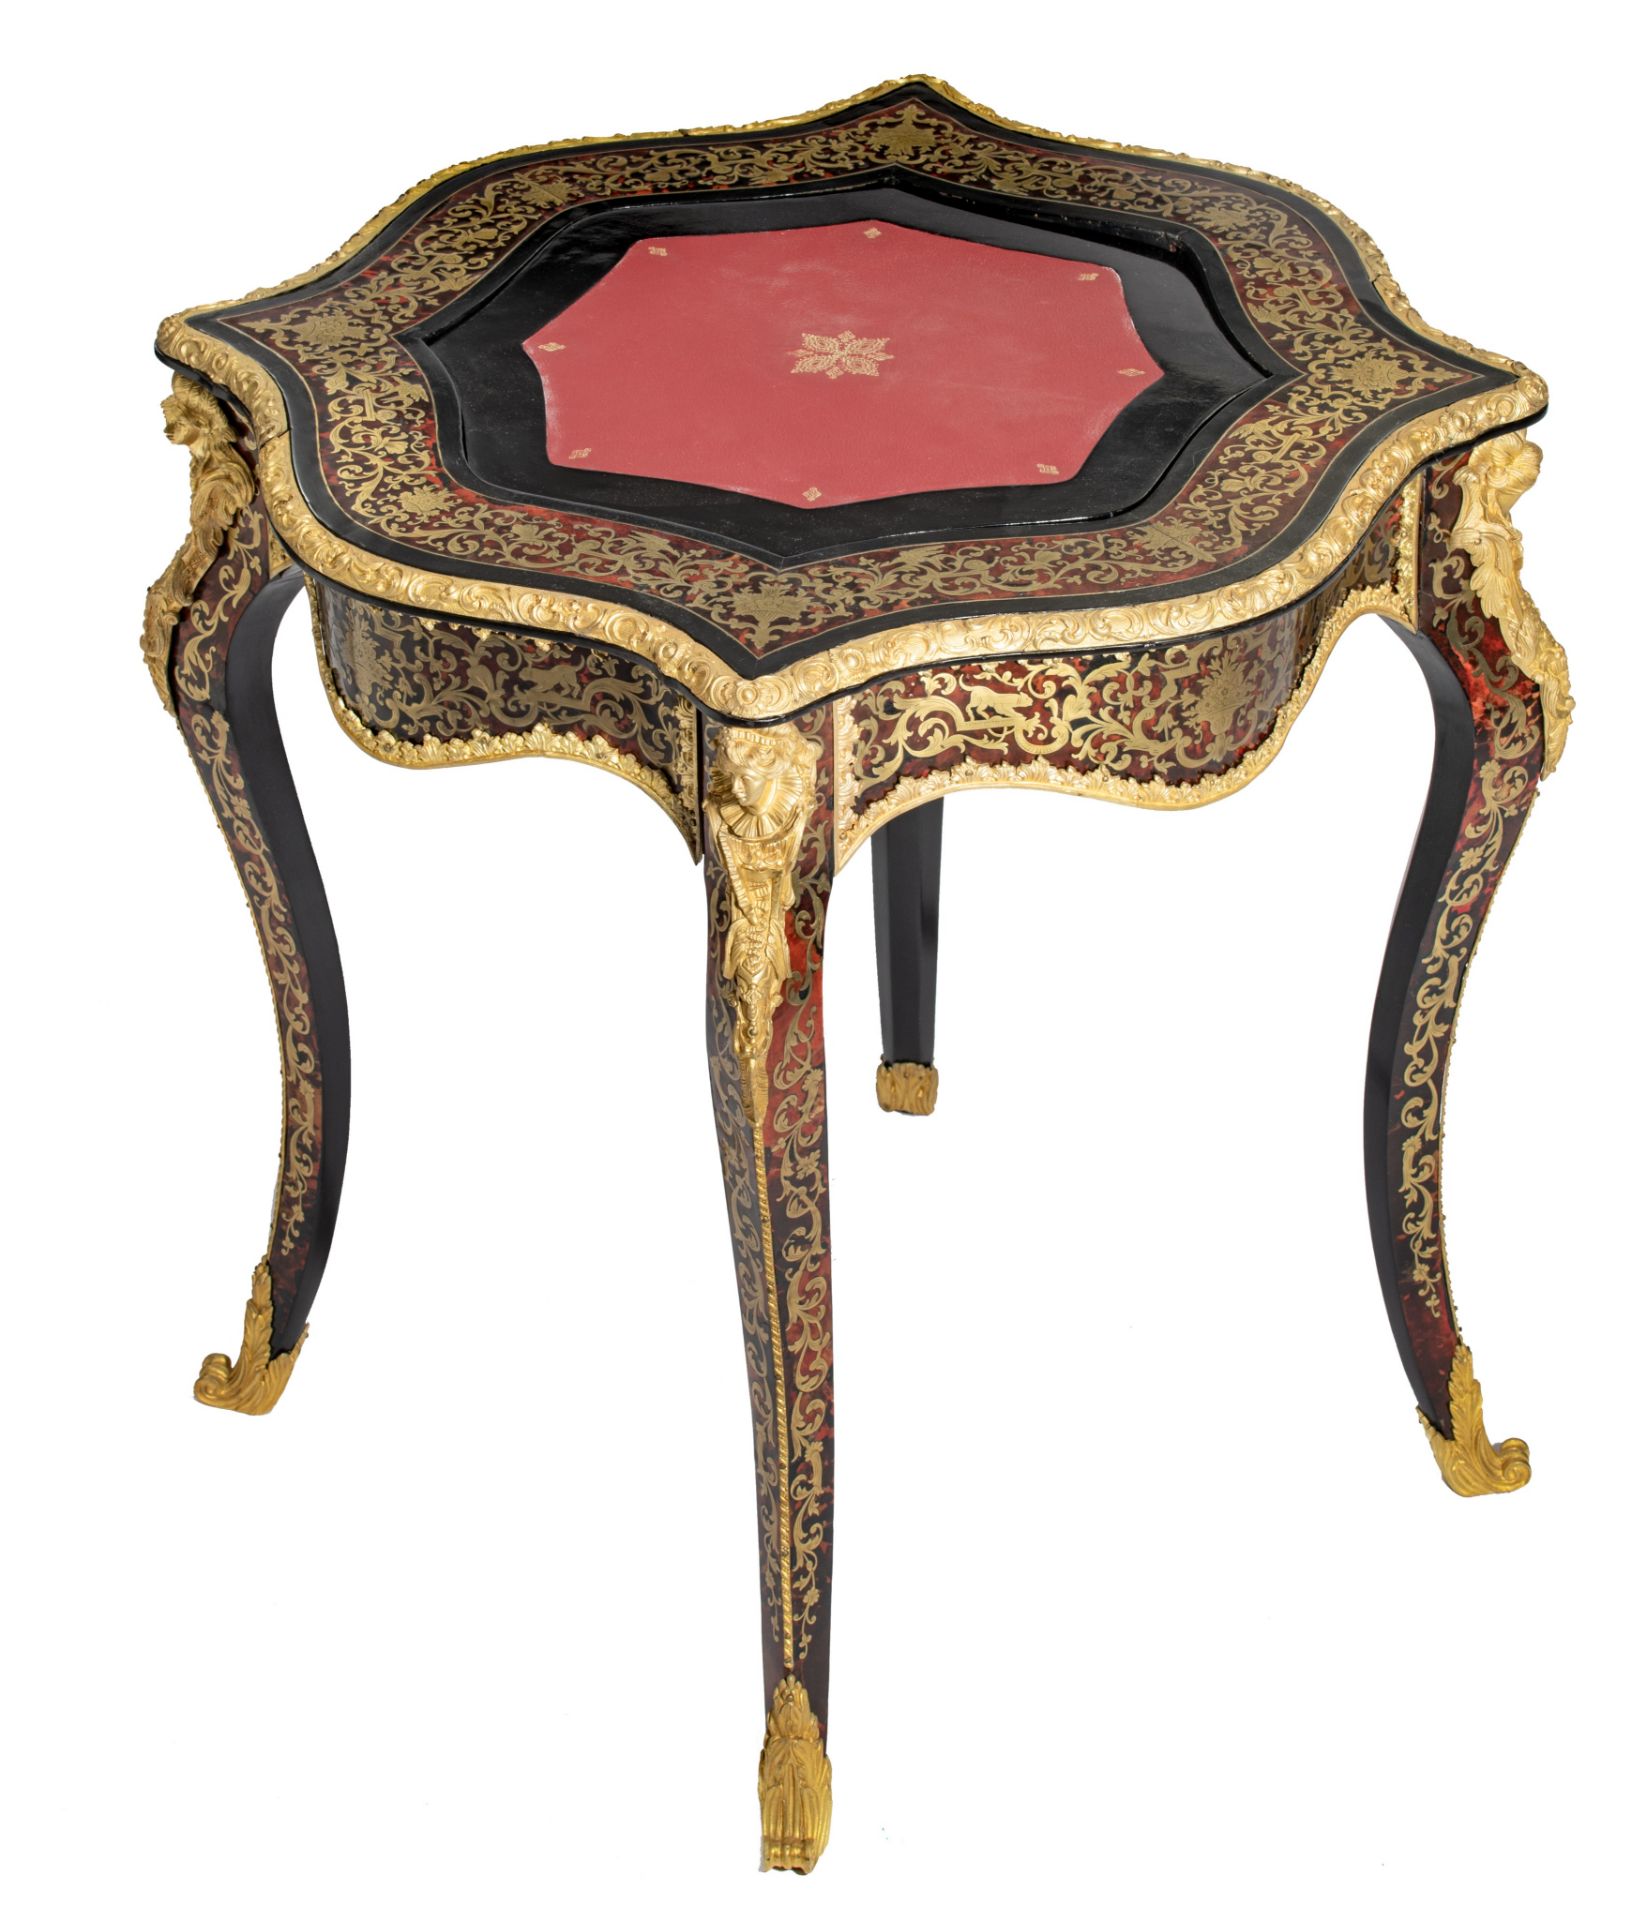 A fine Napoleon III Boulle work games table, with gilt bronze mounts and a red leather inlaid playin - Image 8 of 11